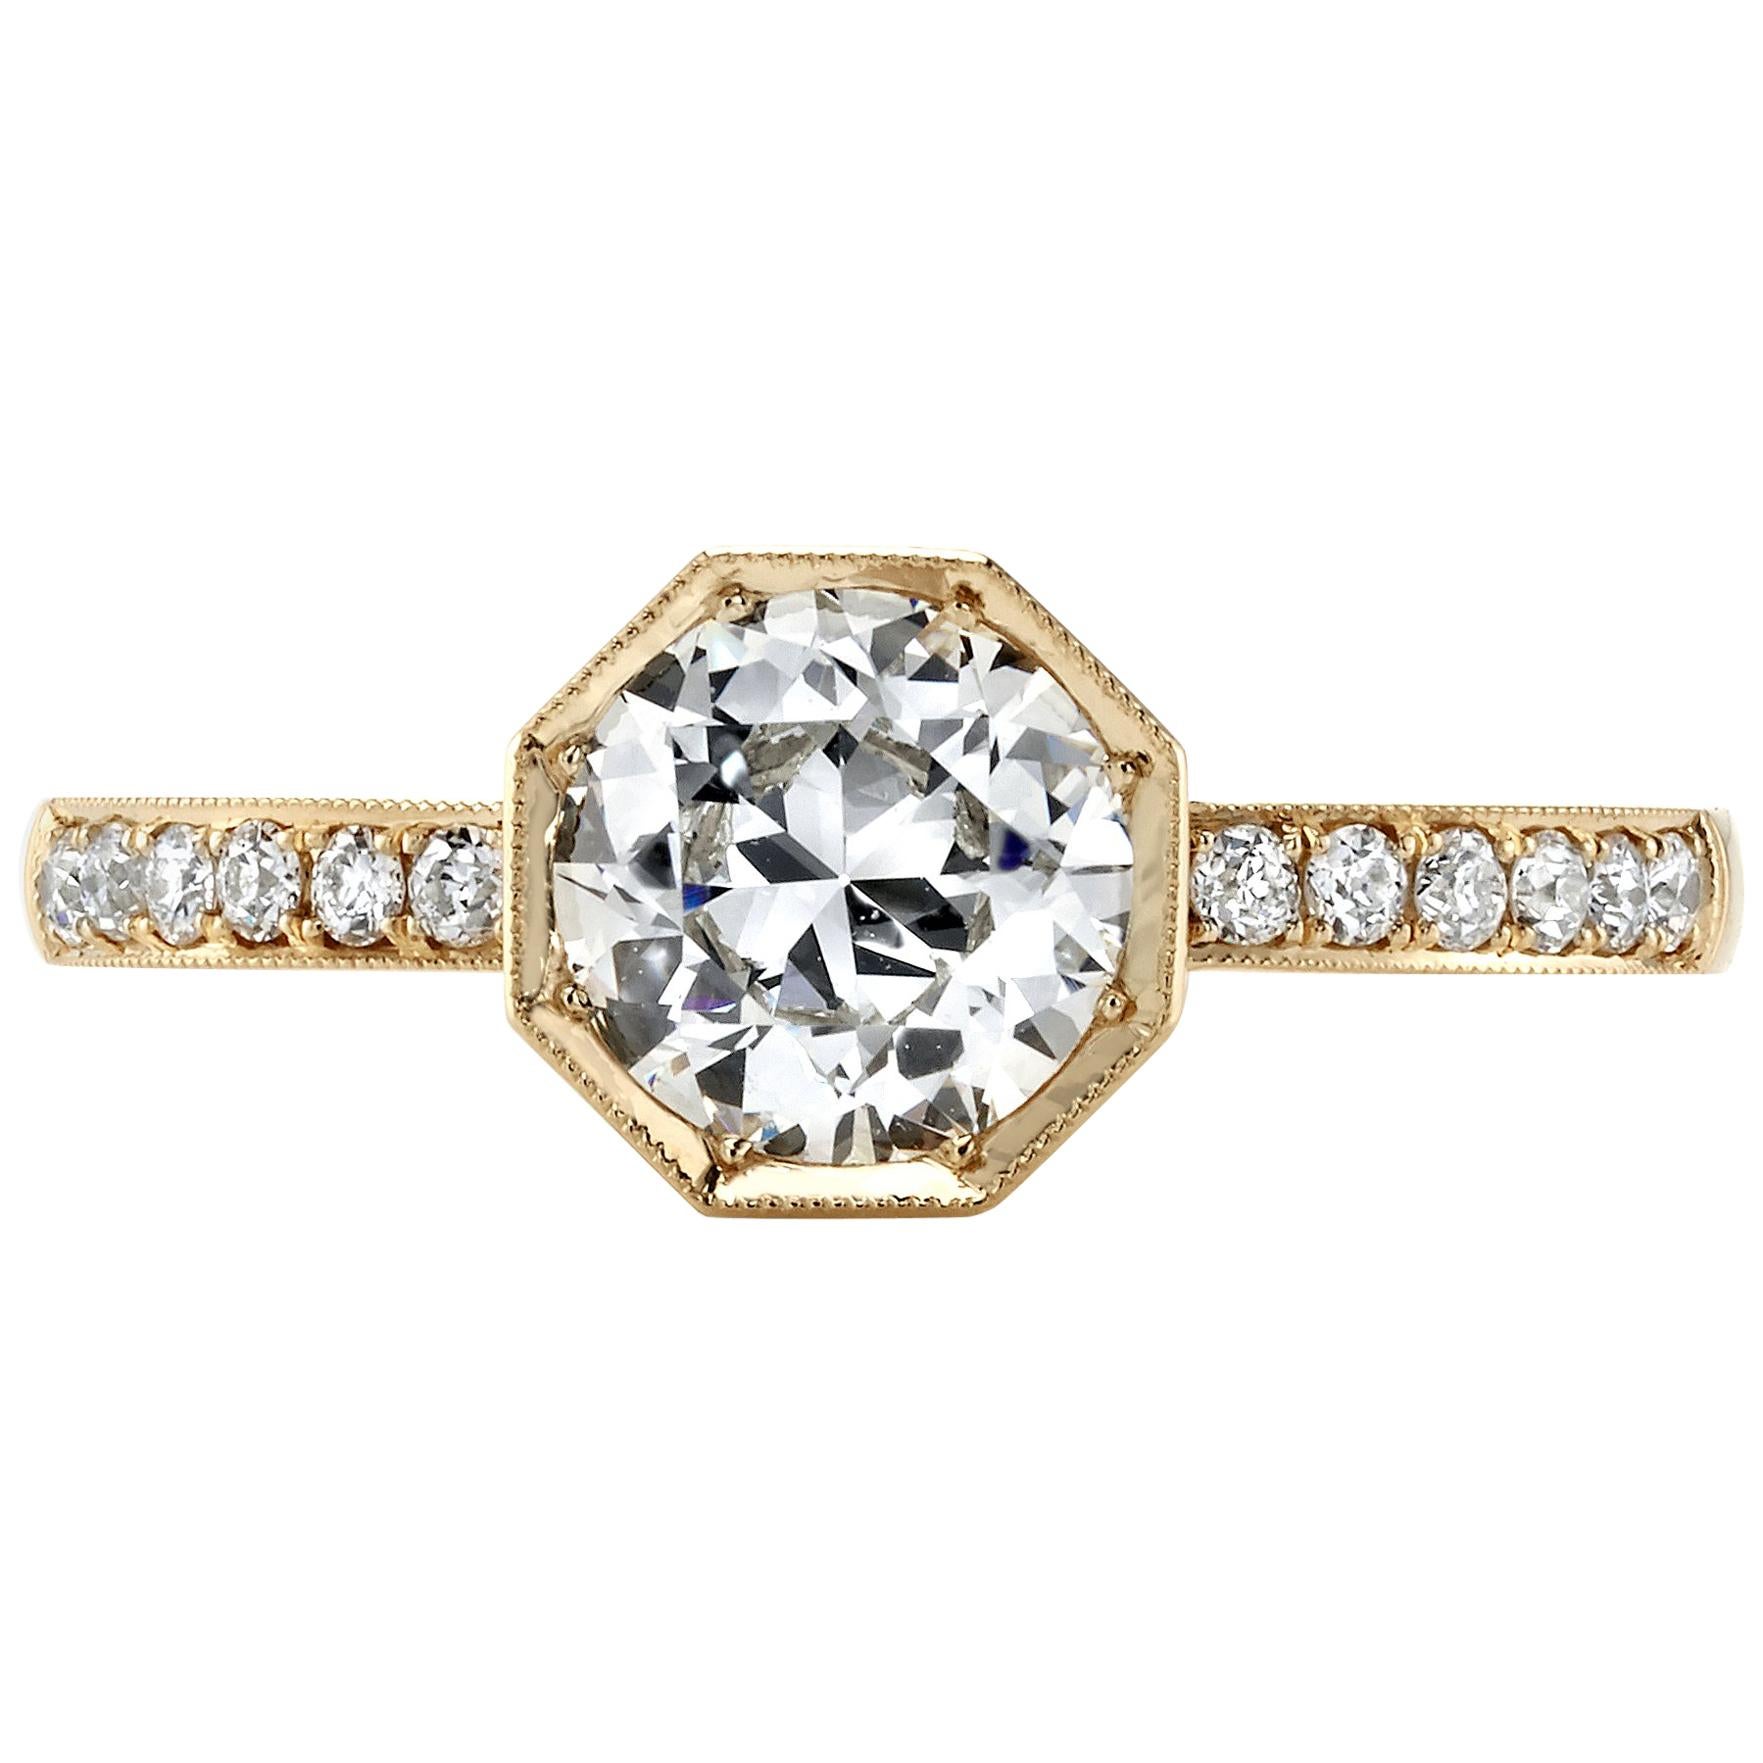 0.92 Carat Old European Cut Diamond Set in a Handcrafted Yellow Gold Ring